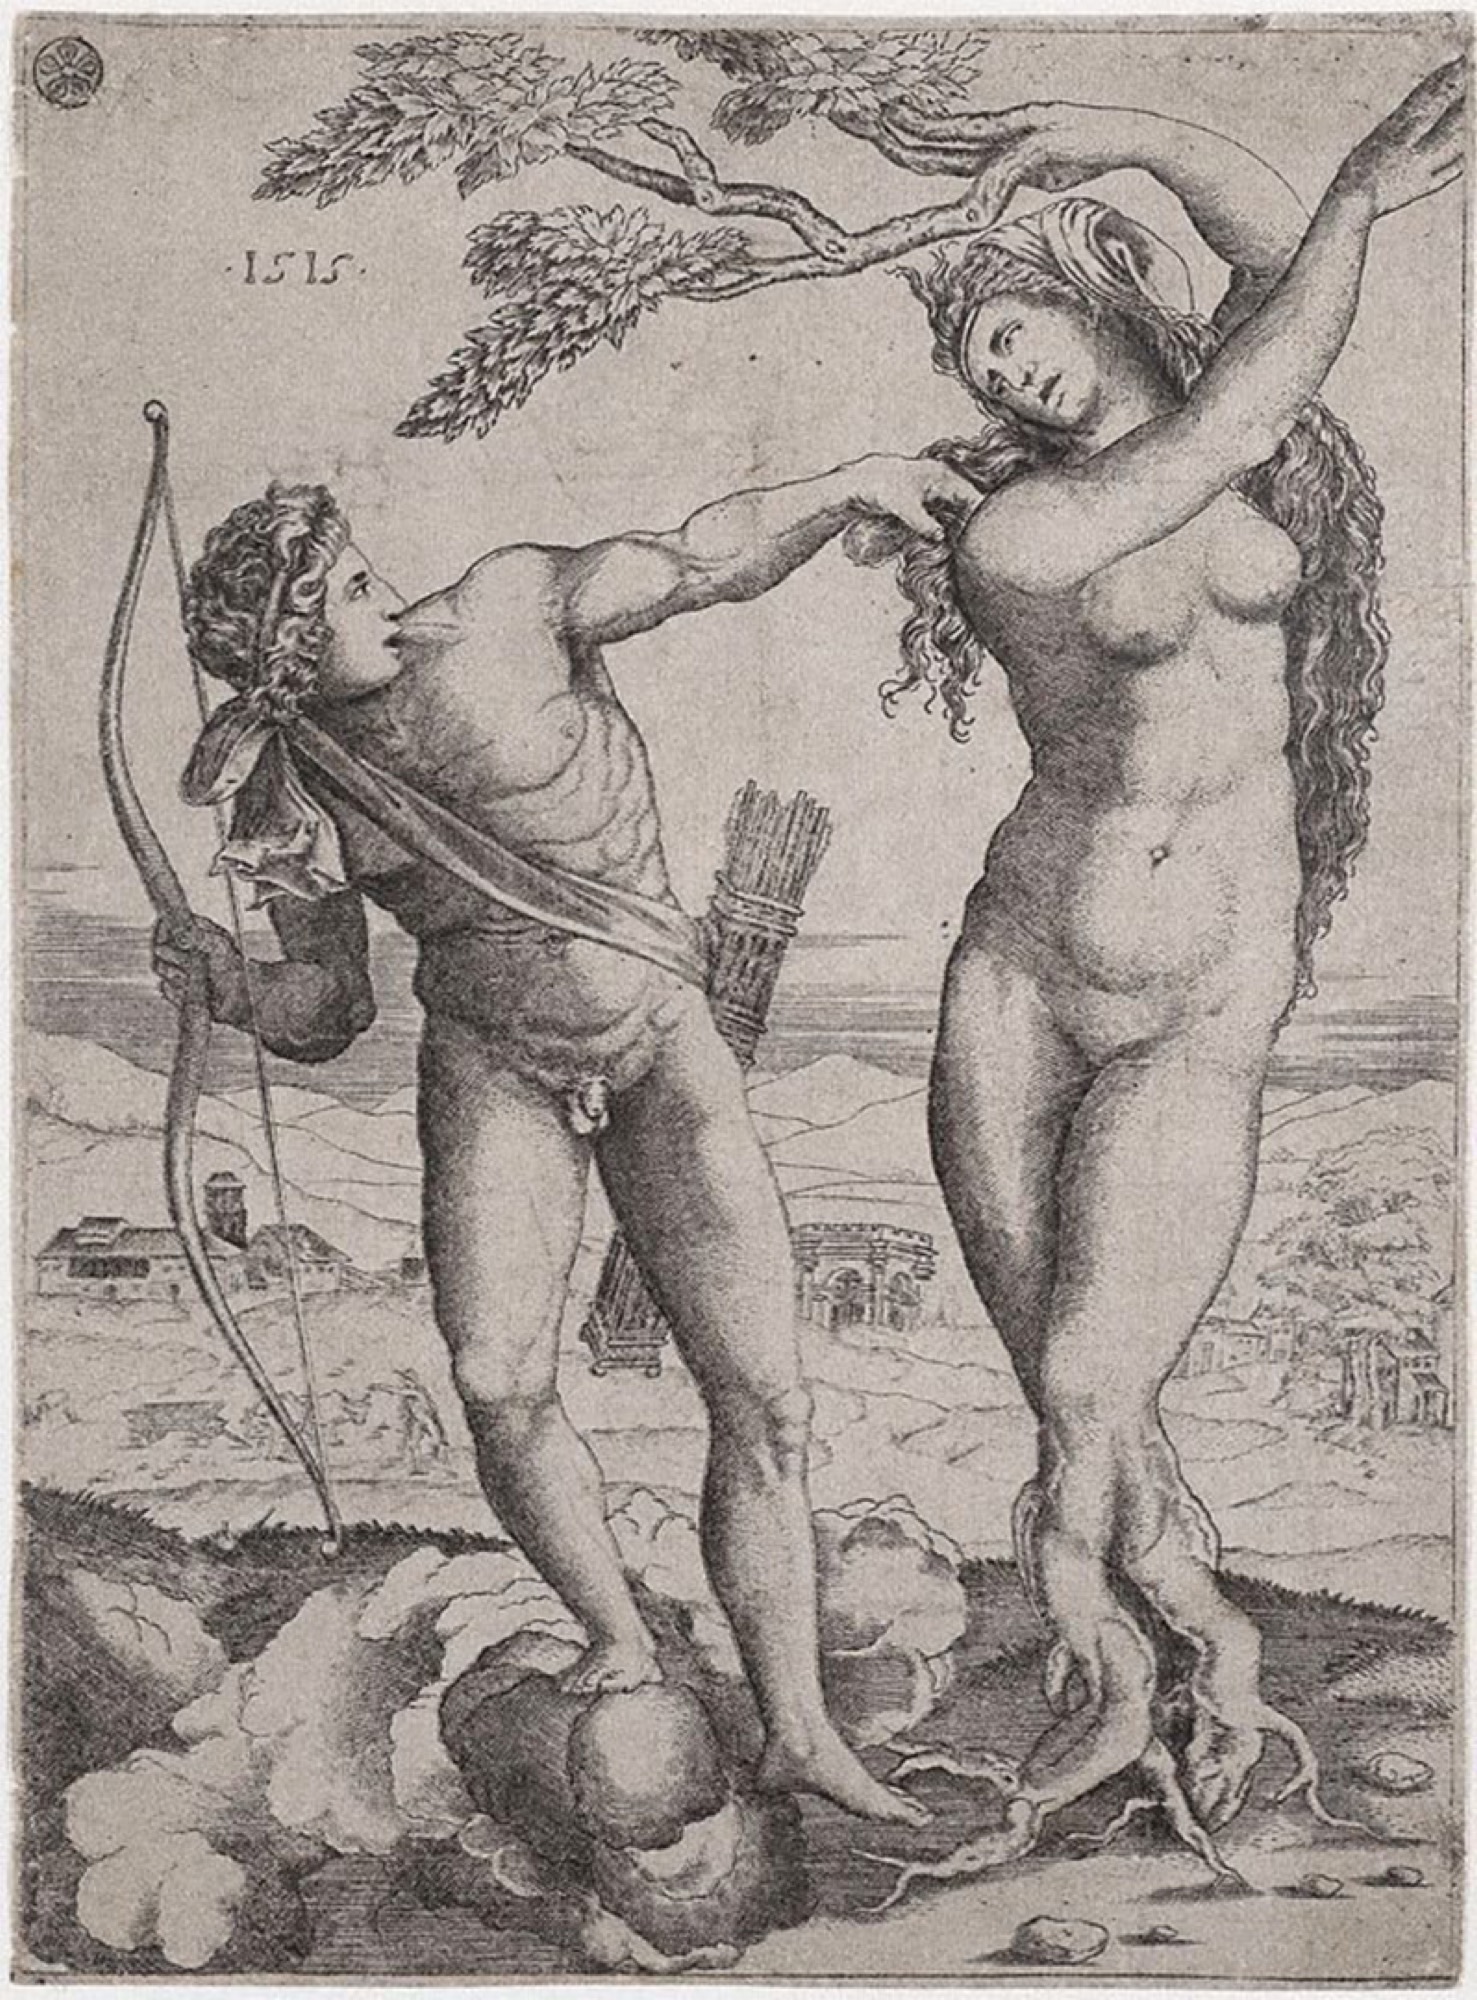 Agostino de Musi, Apollo and Daphne, 1515. Engraving, 23.0 x 17.0 cm (image); 23.4 x 17.3 cm (sheet). Art Gallery of New South Wales, Sydney, purchased 1937. Photograph Andrew Curtis.